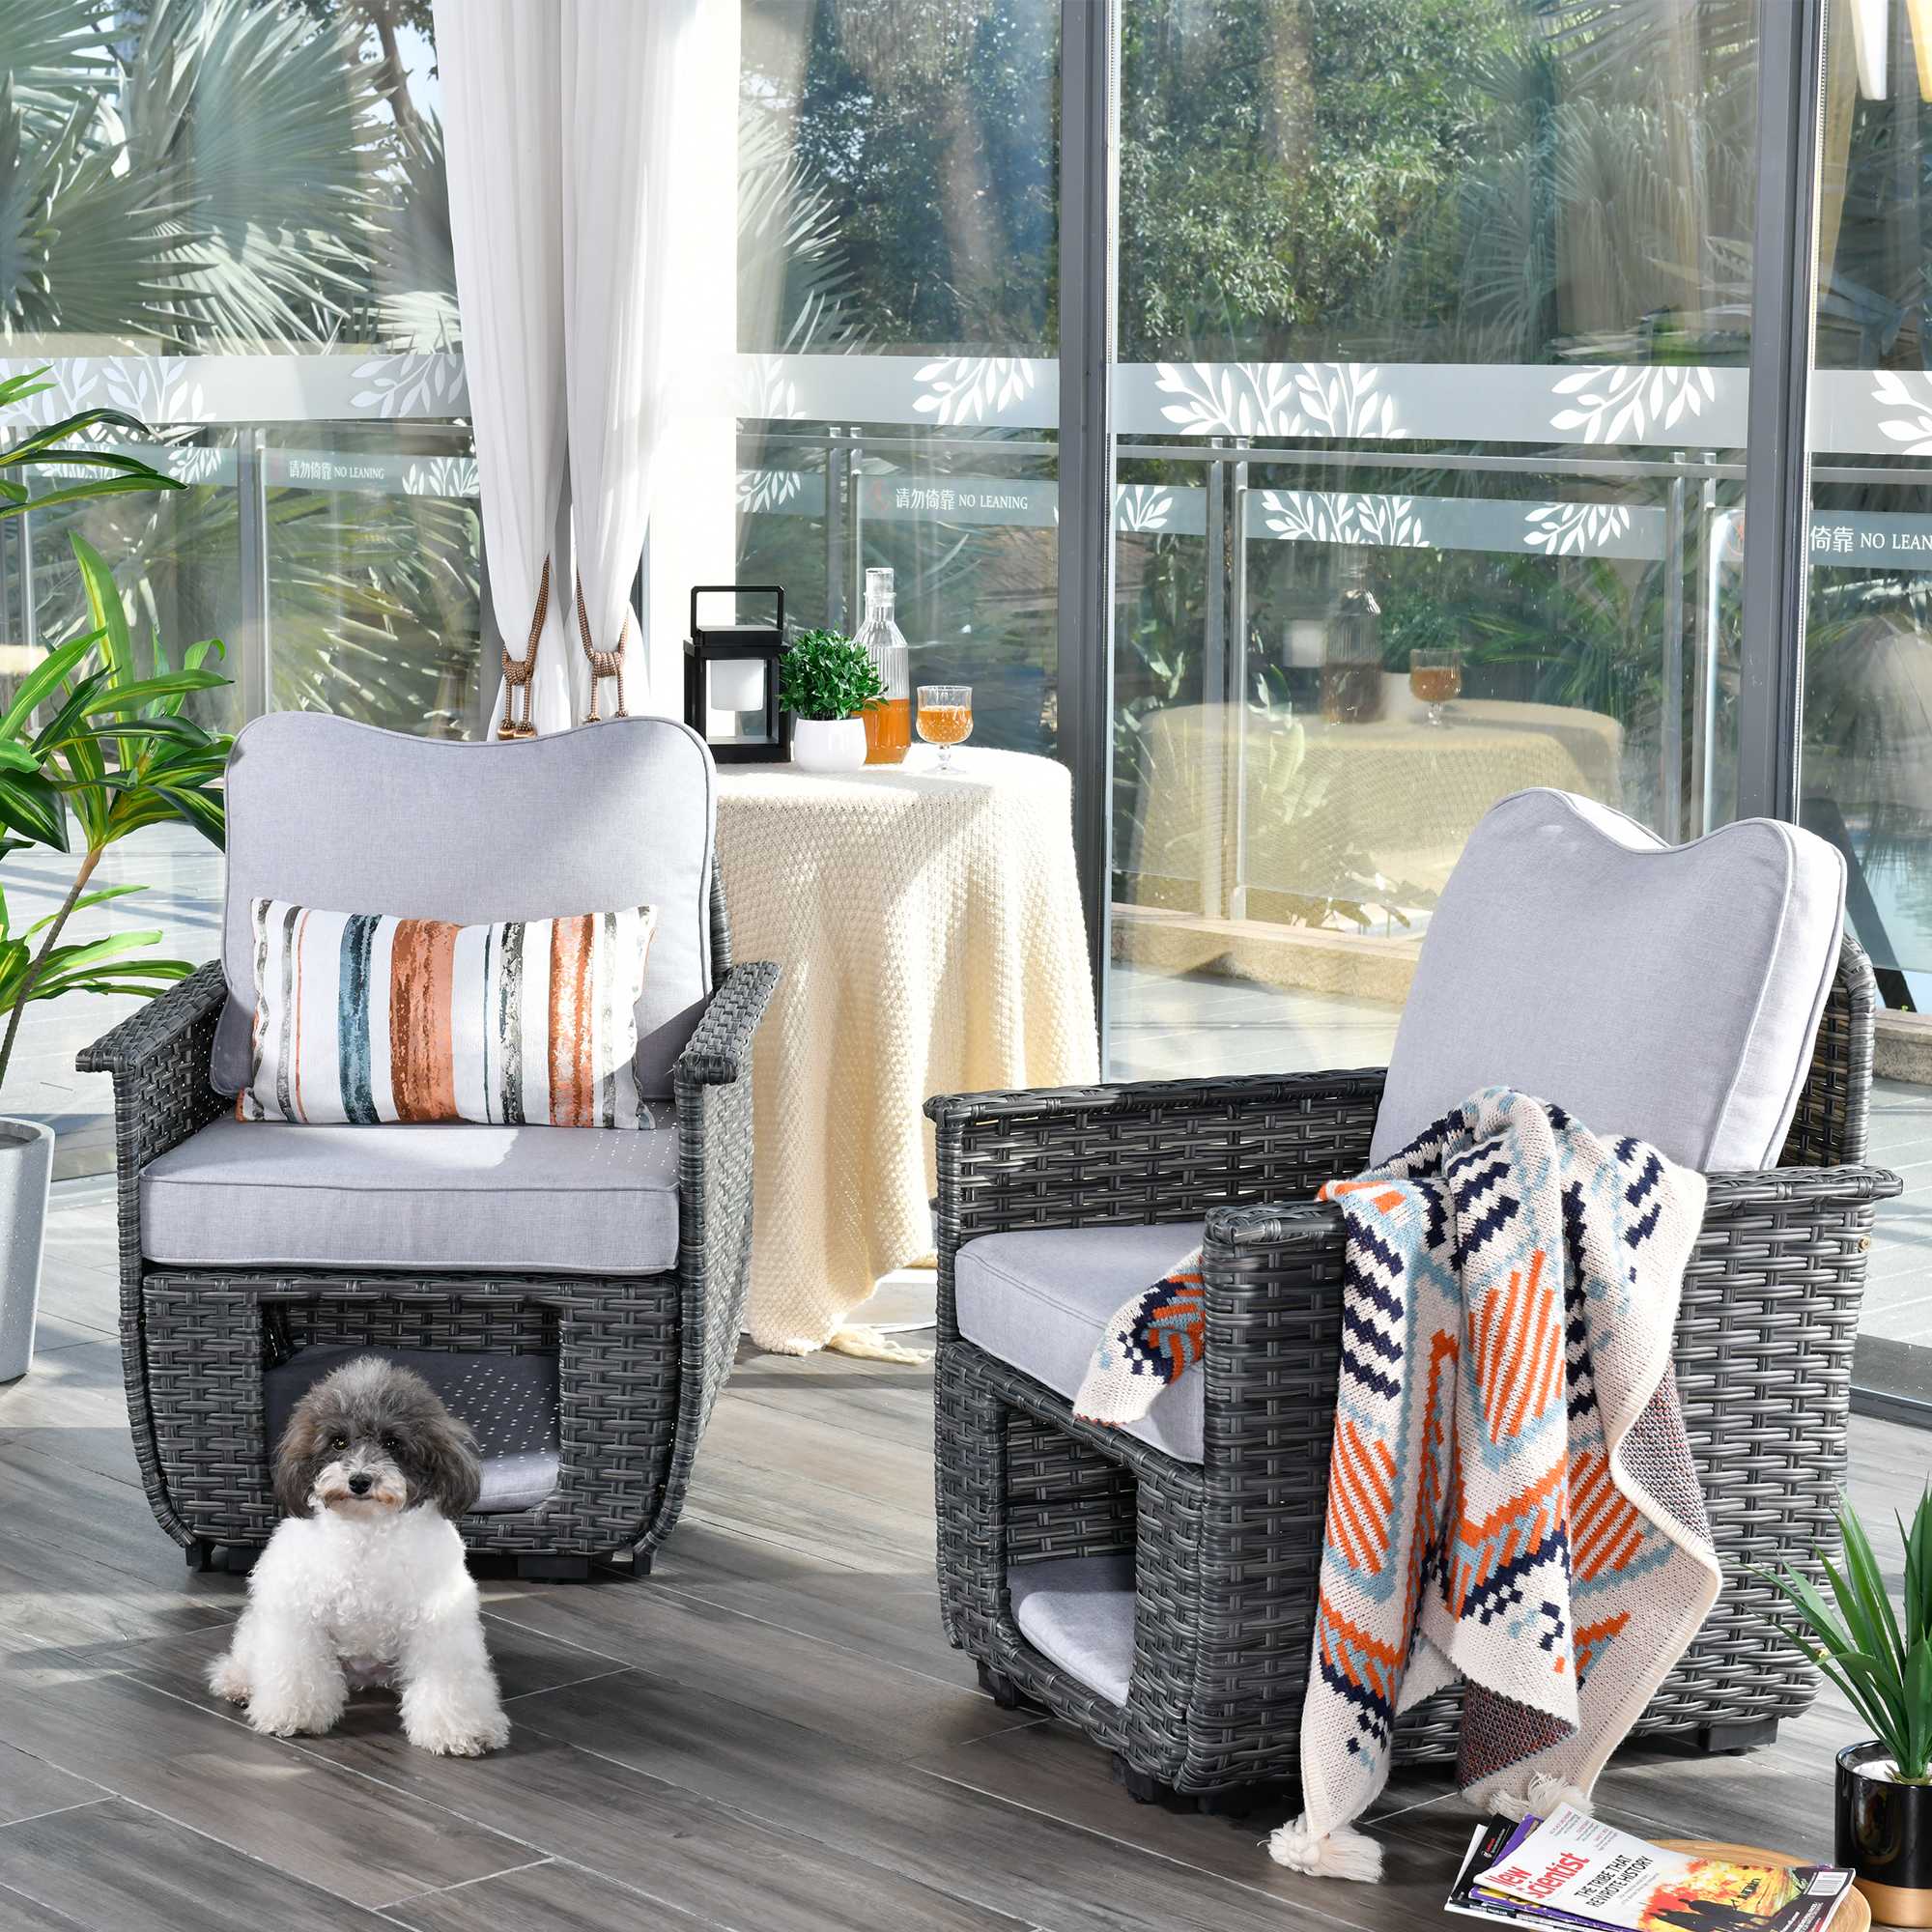 Outdoor Patio Decorating With Limited Space